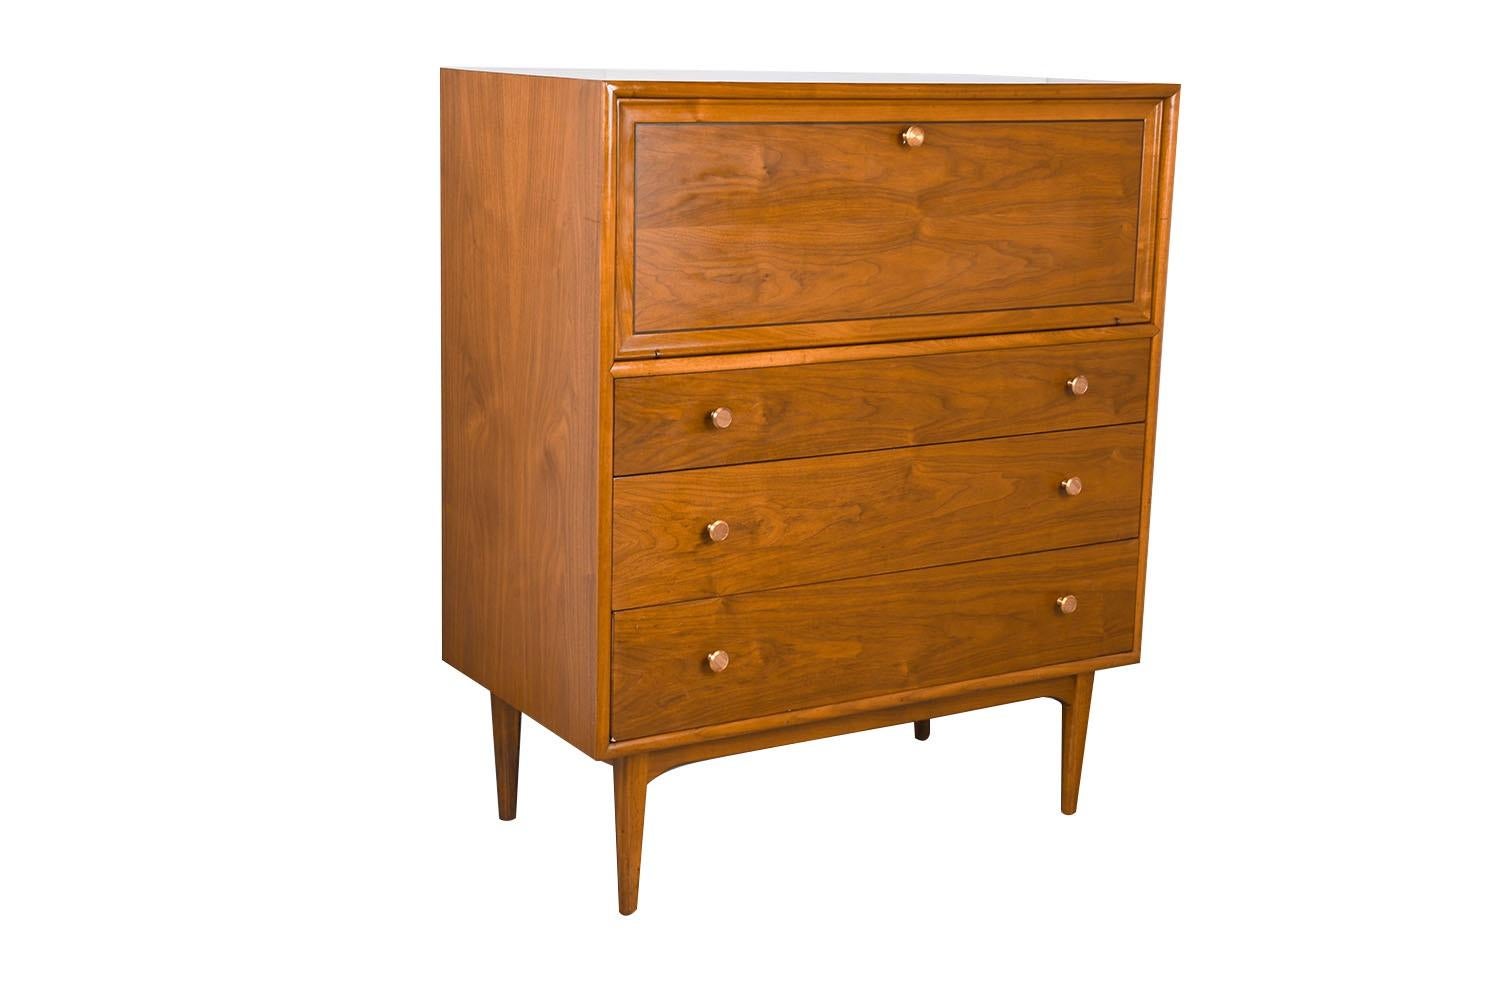 An elegant Mid-Century Modern tall dresser/highboy/chest of drawers designed by Kipp Stewart and Stewart MacDougall for Drexel’s Declaration Collection, circa 1960’s. Featuring a solid, beautifully grained walnut wood case and frame. The upper drop